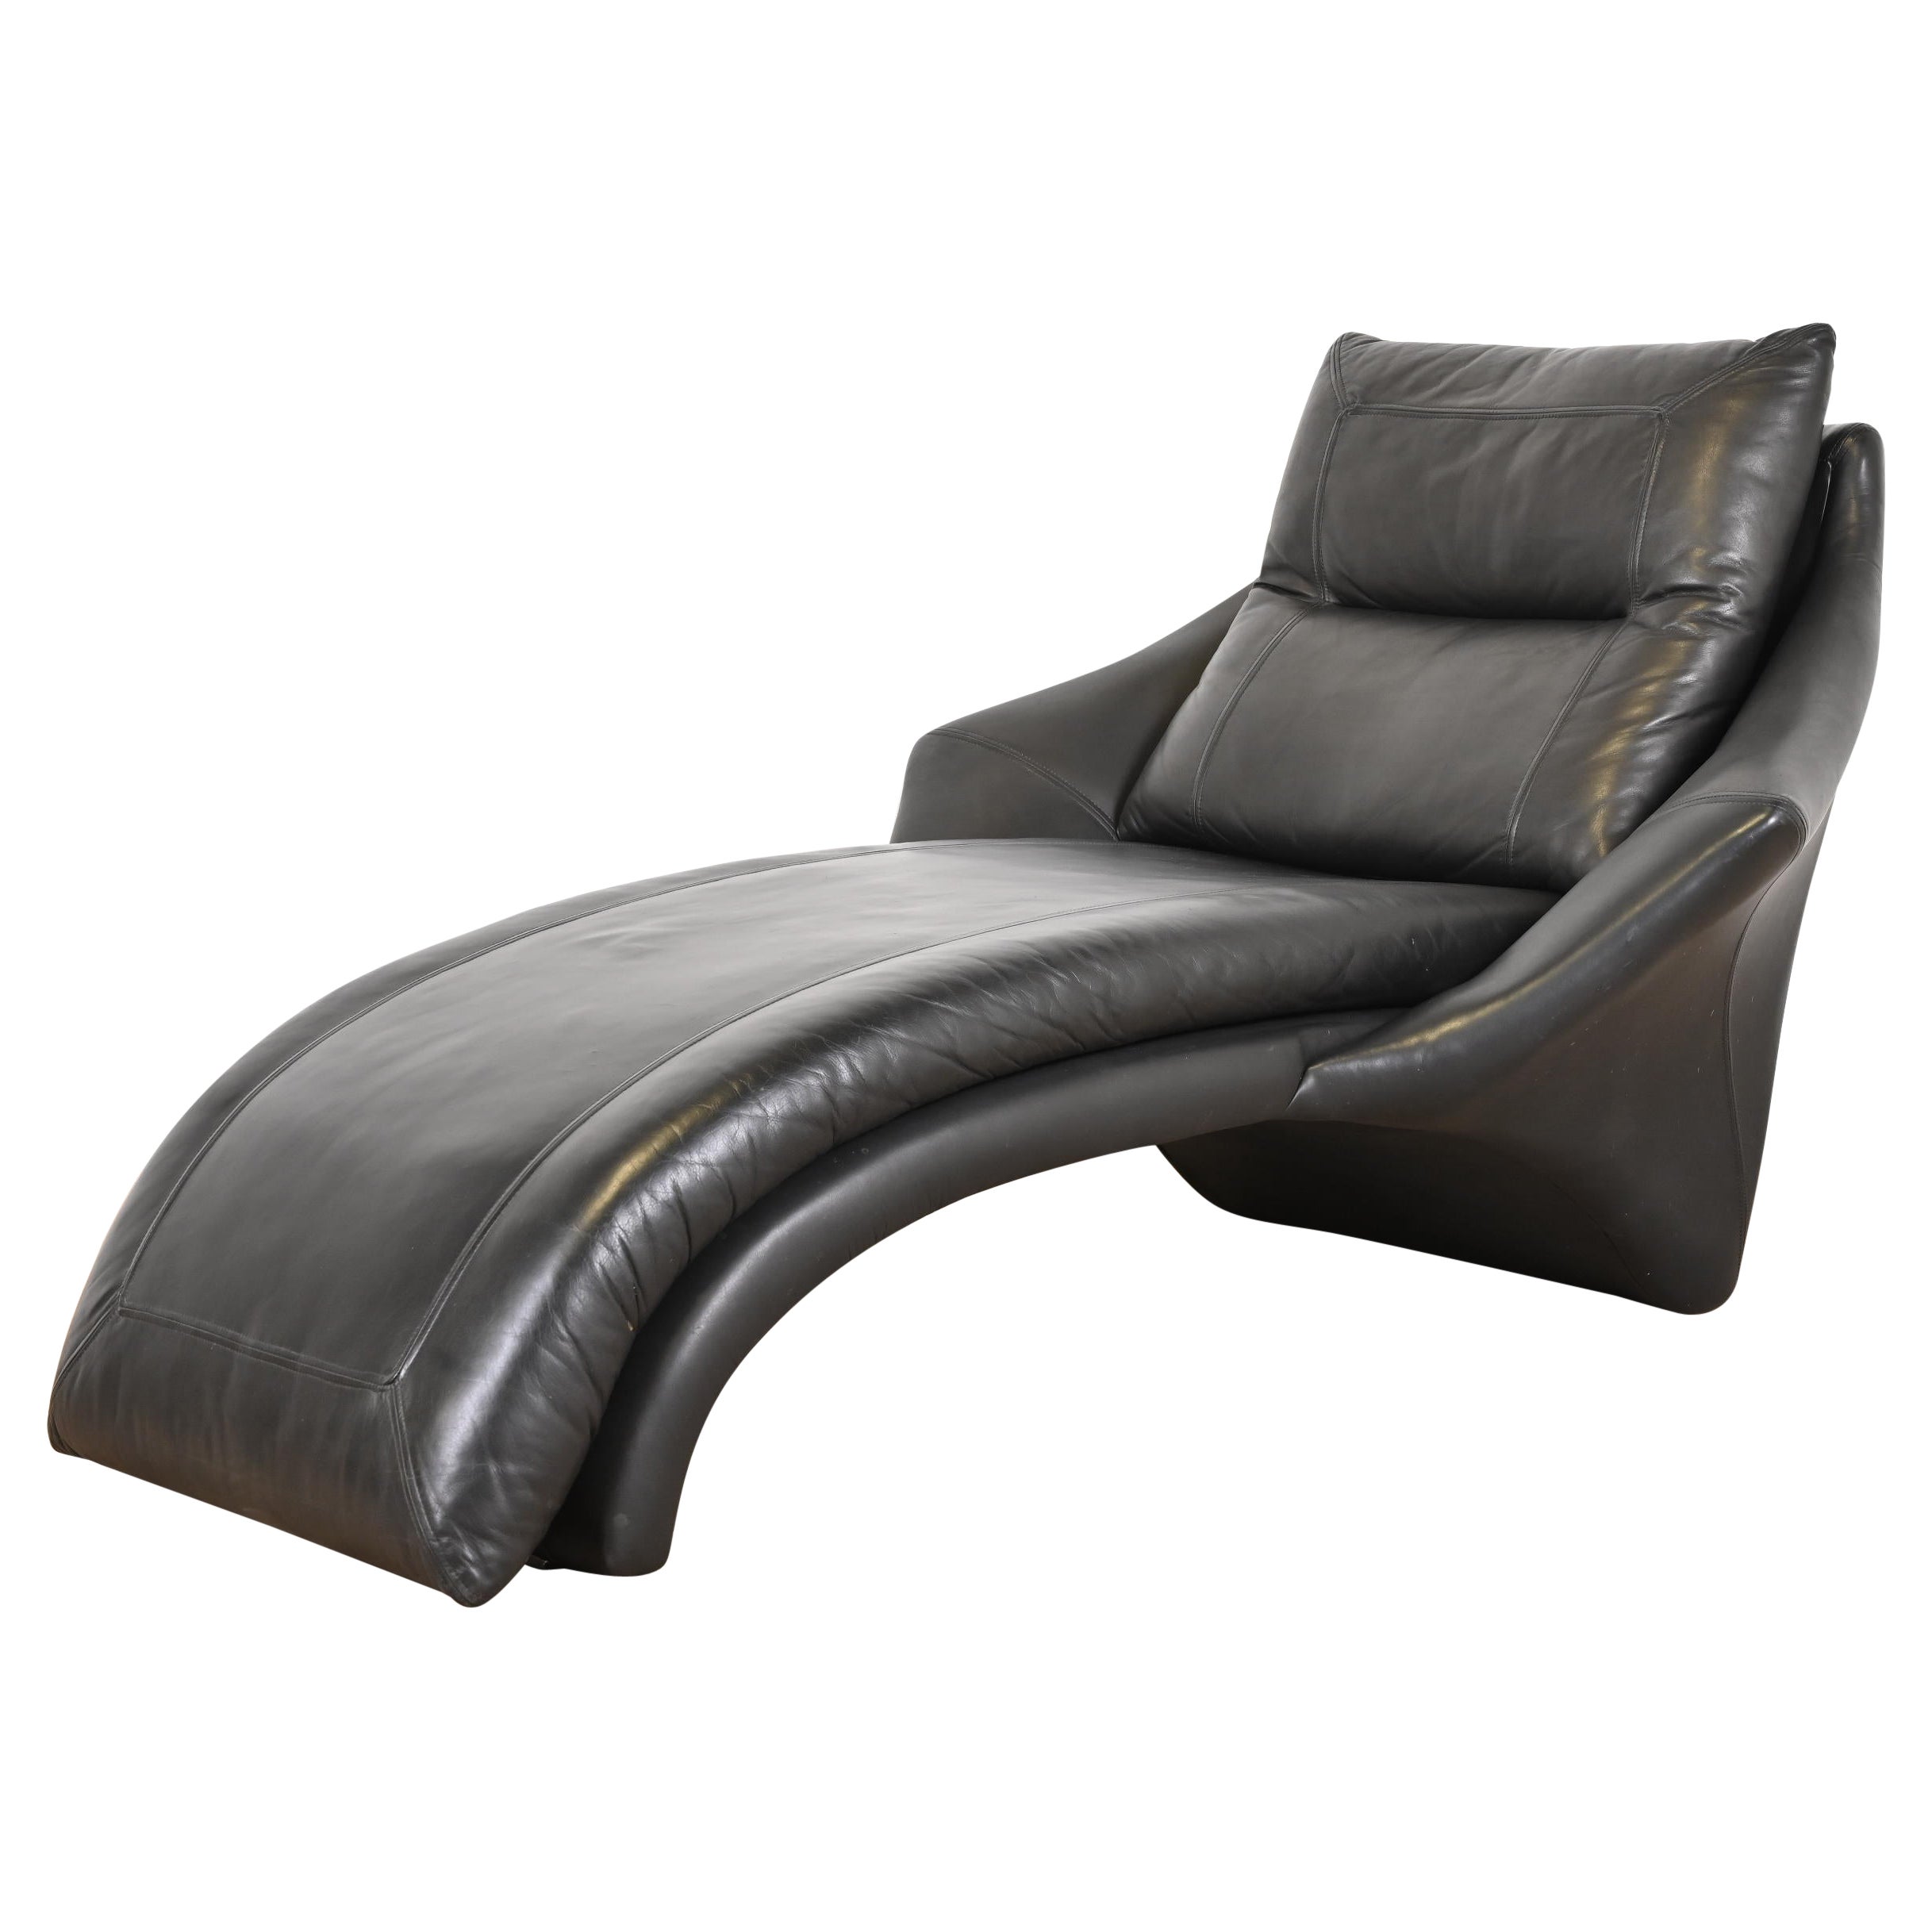 Roger Rougier Modern Black Leather Chaise Lounge For Sale